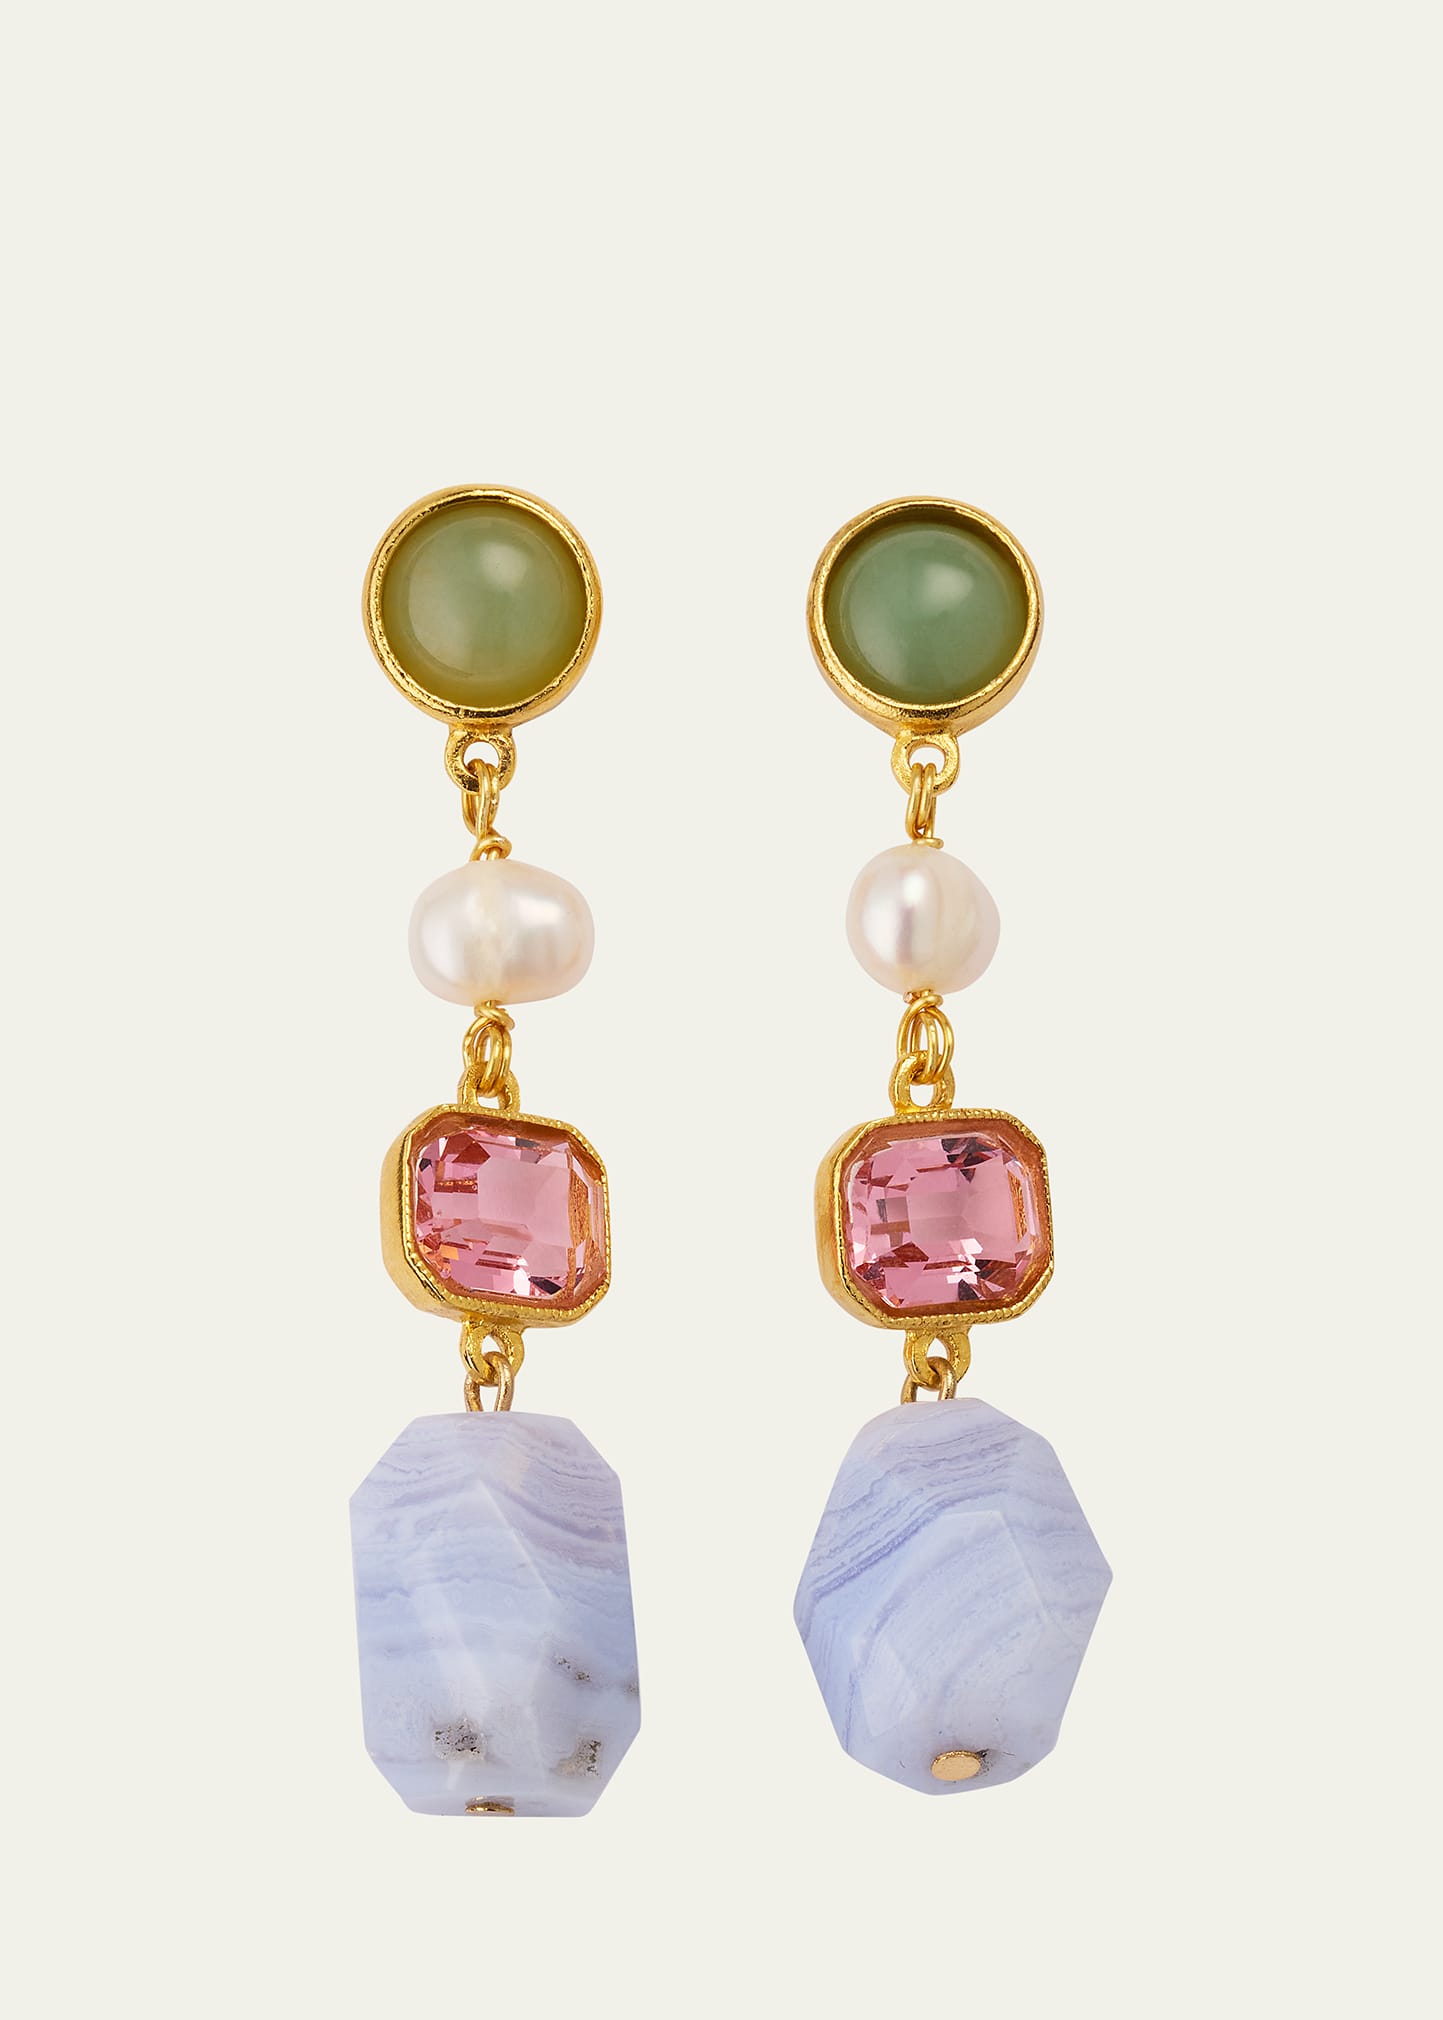 24k Electroplated Gold Mixed-Stone Drop Earrings